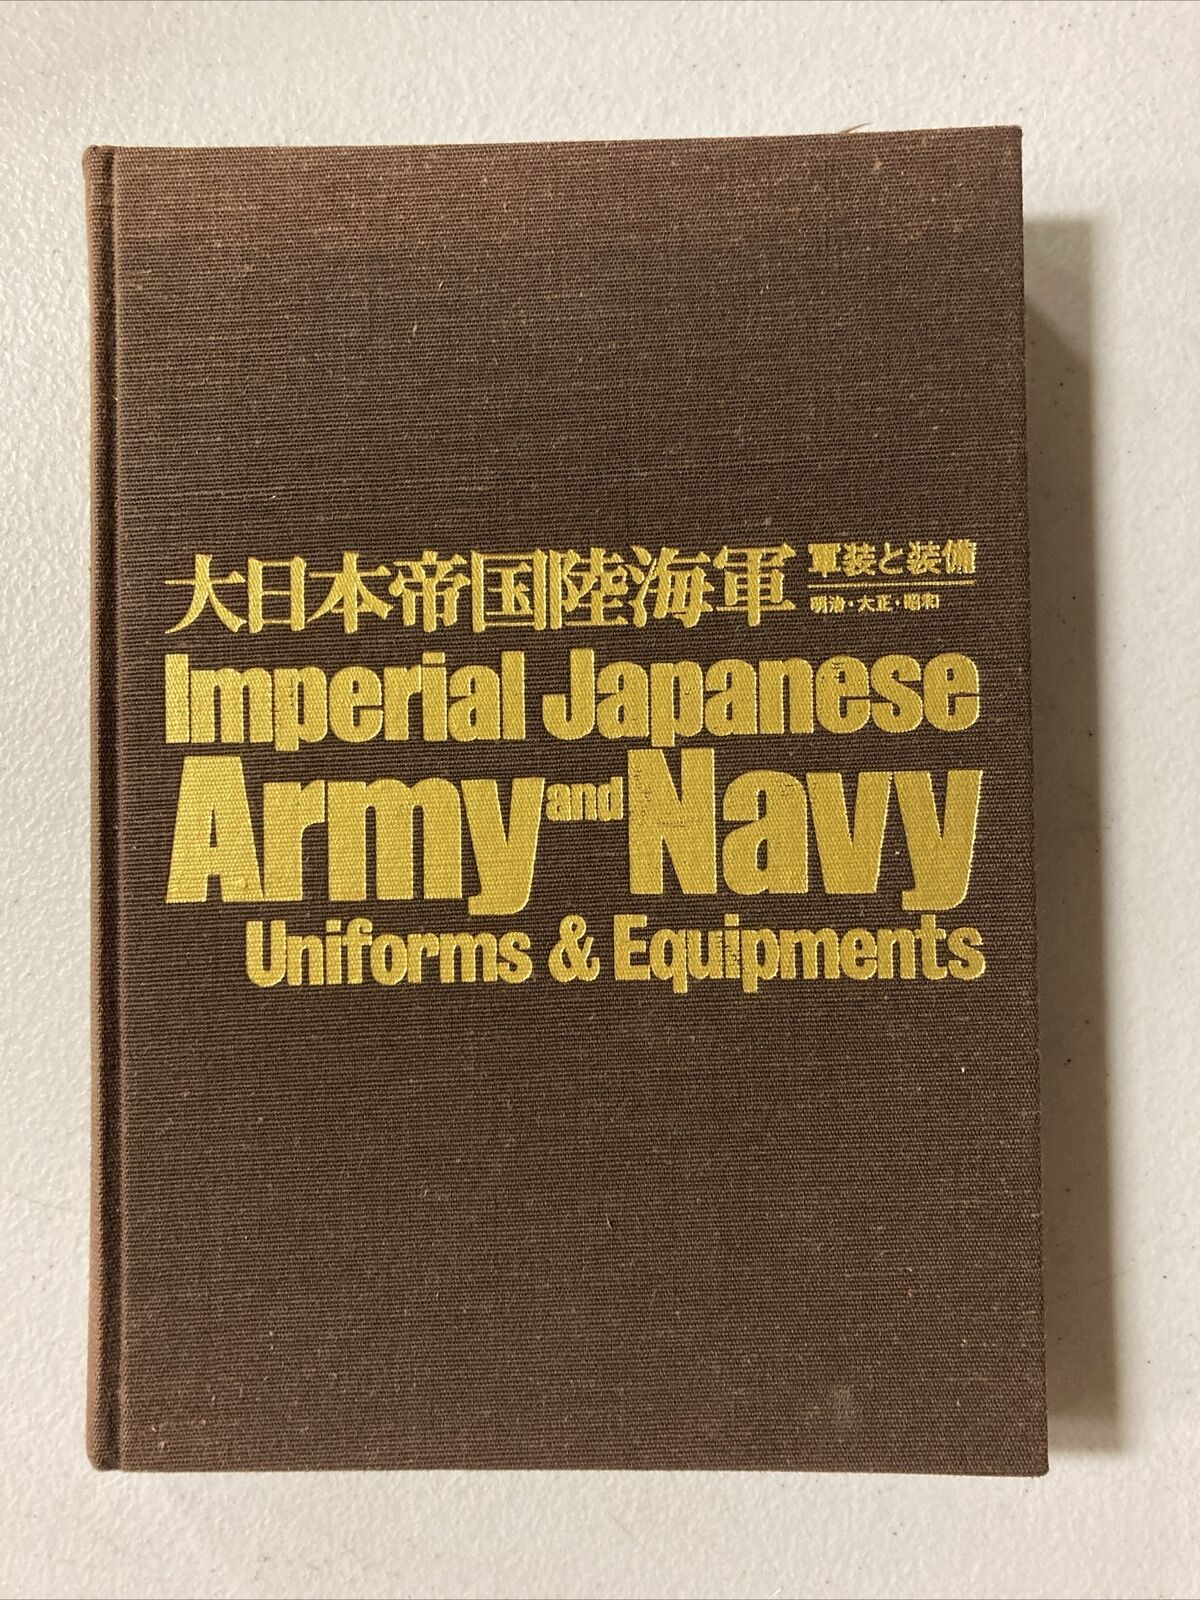 Imperial Japanese Army and Navy Uniforms and Equipment Hardcover 1973 Pictorial